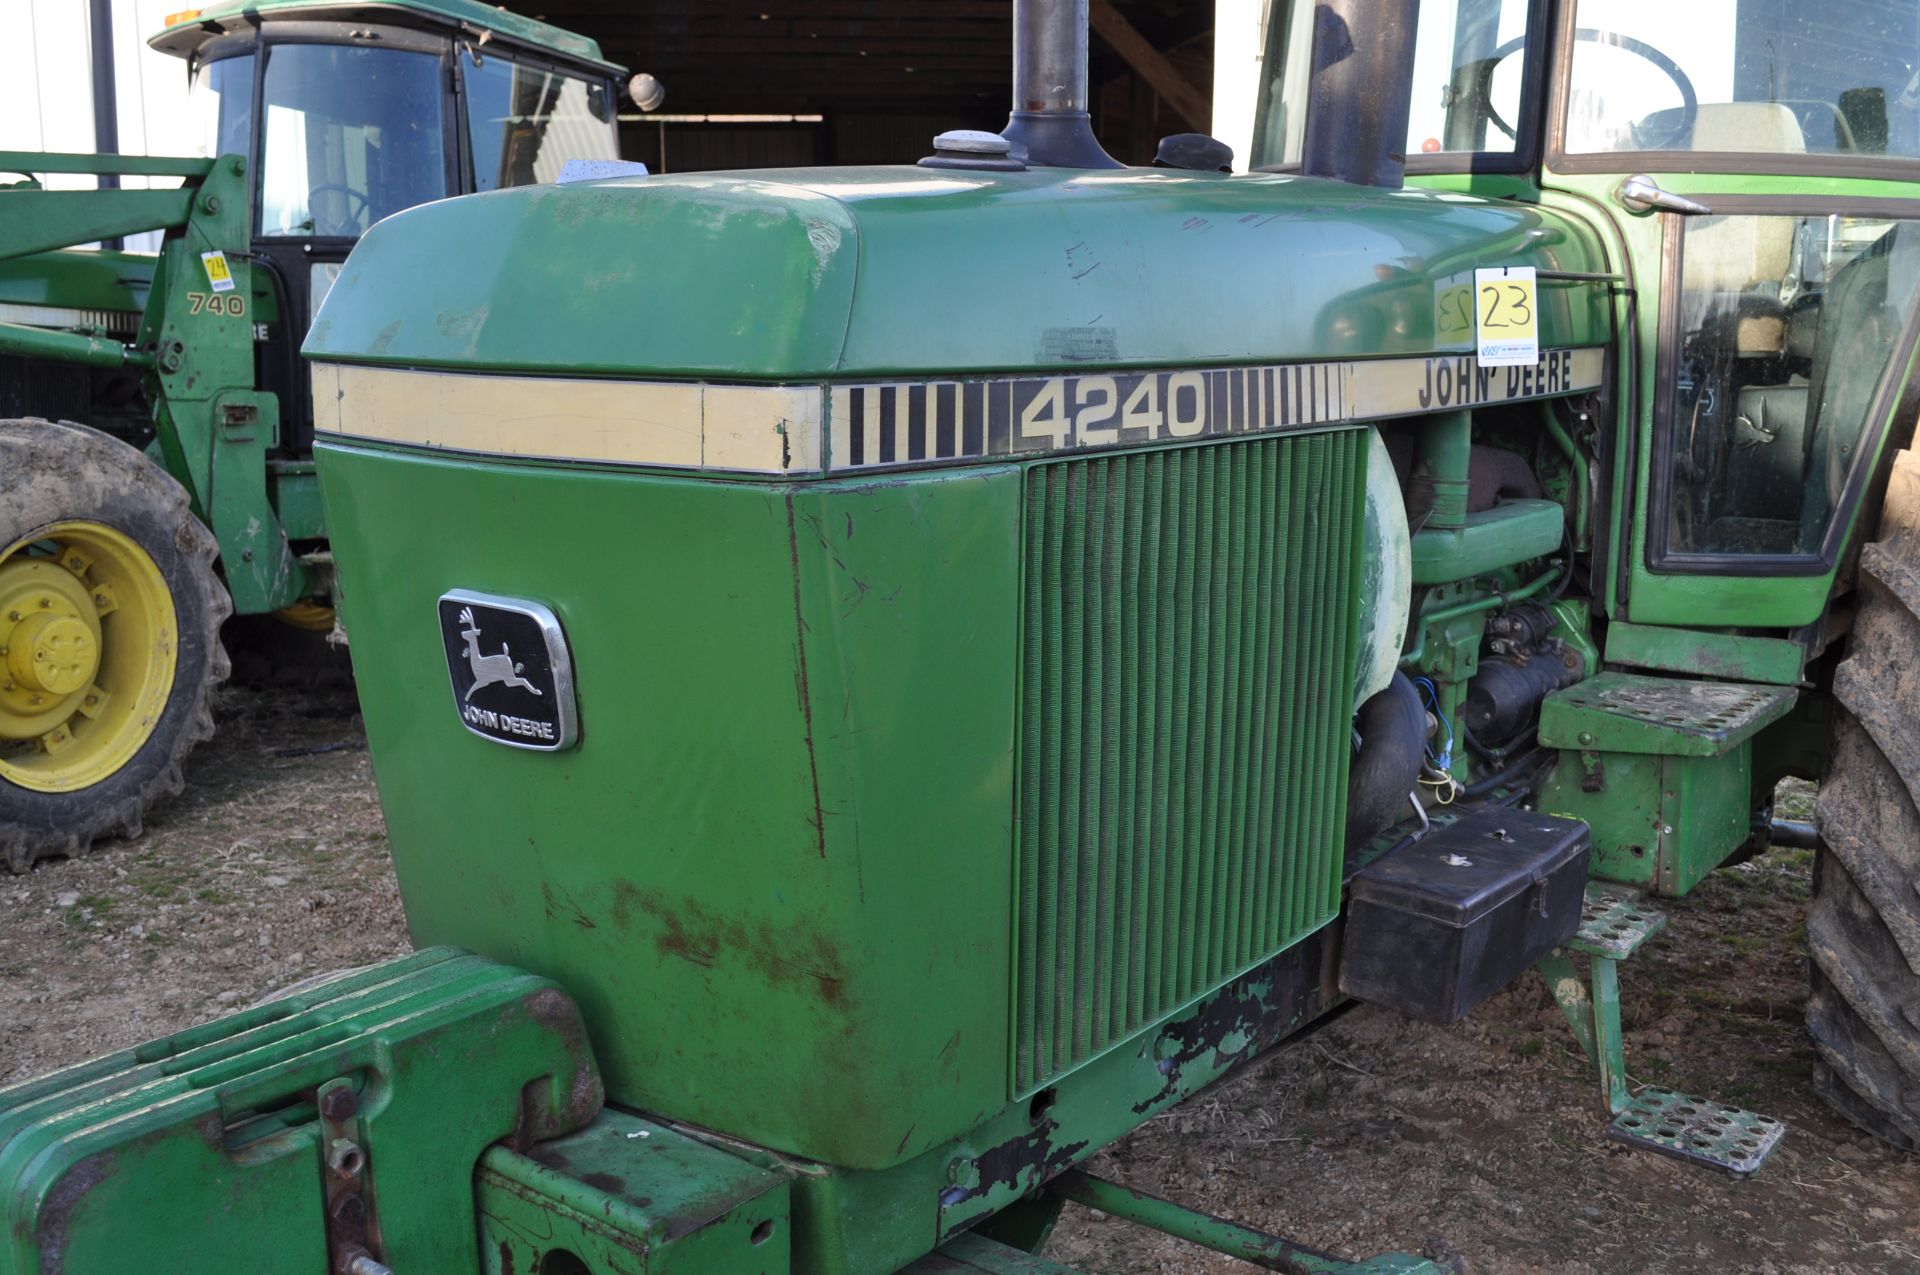 John Deere 4240 tractor, Cab, 18.4-34 tires, 11L-15 front, front weights, quad range, 2 hyd remotes - Image 13 of 26